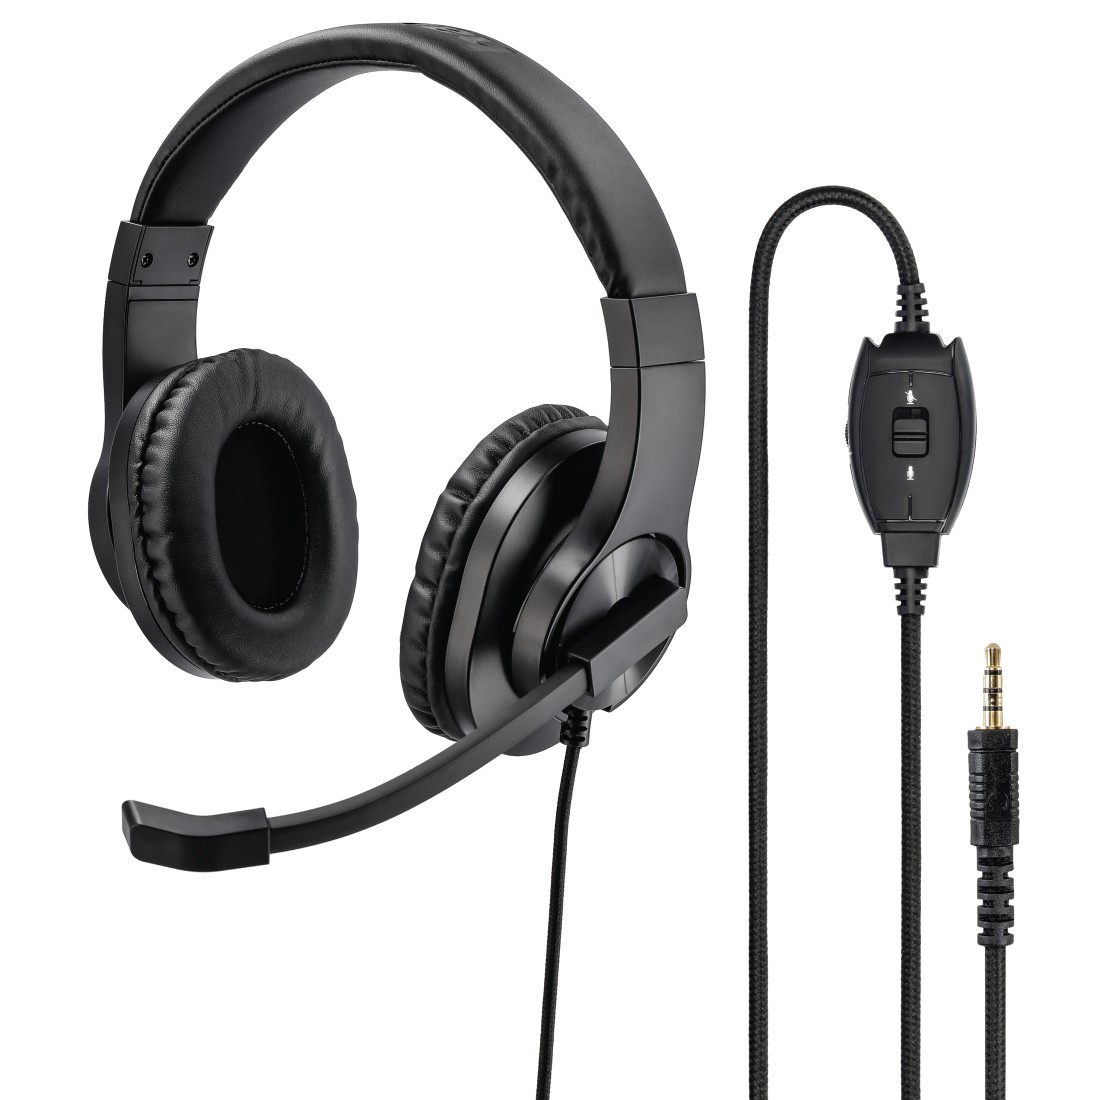 Hama HS-P350 PC Office Stereo Headset